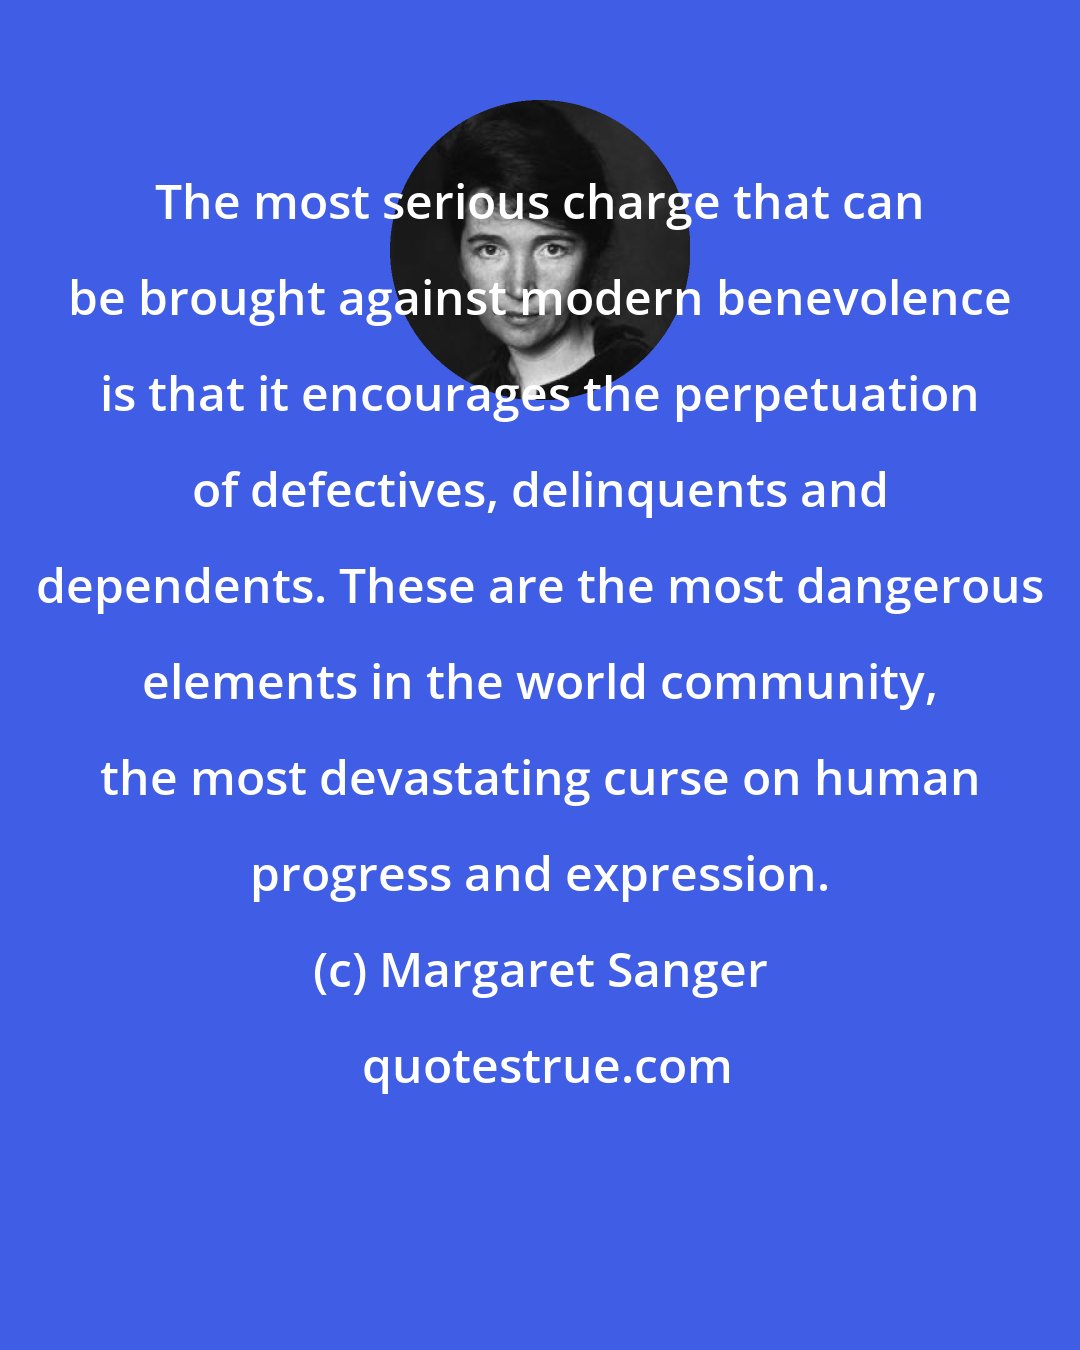 Margaret Sanger: The most serious charge that can be brought against modern benevolence is that it encourages the perpetuation of defectives, delinquents and dependents. These are the most dangerous elements in the world community, the most devastating curse on human progress and expression.